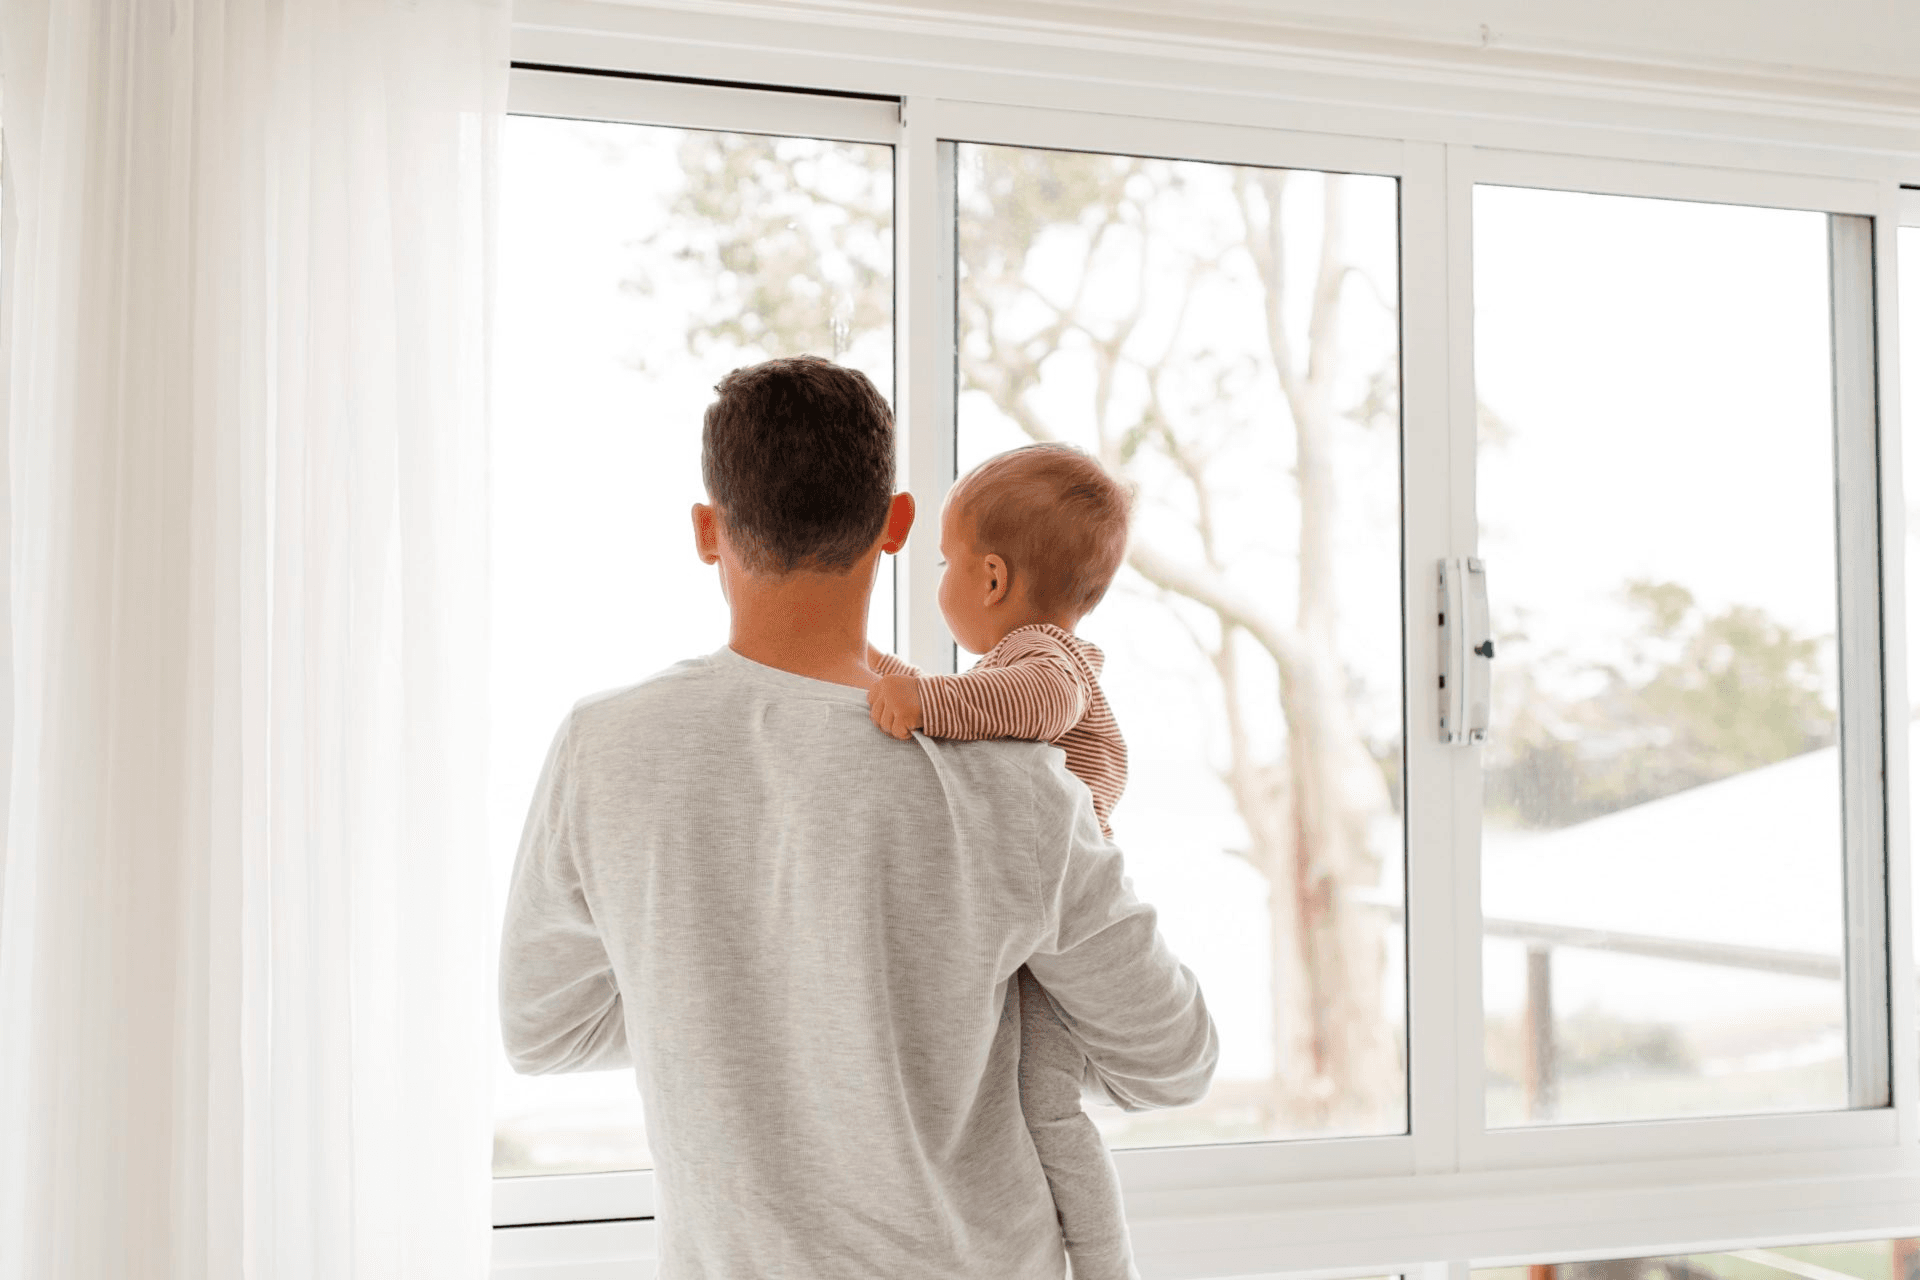 Man holding baby in front of window